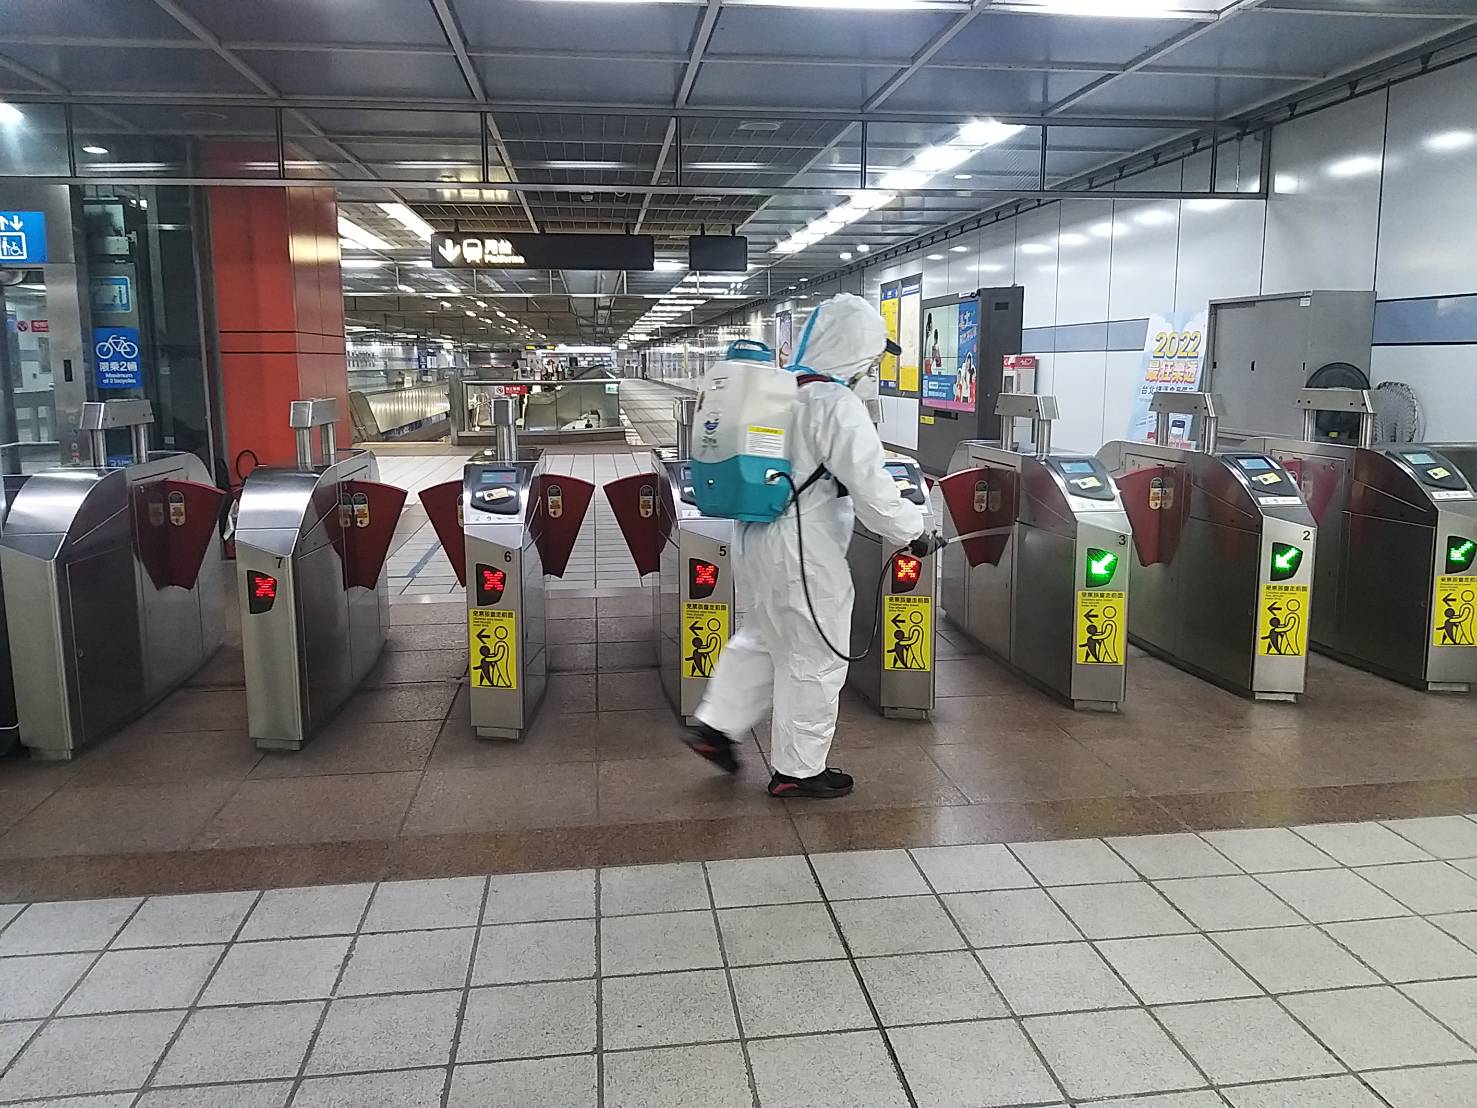 MRT Station being disinfected after closing